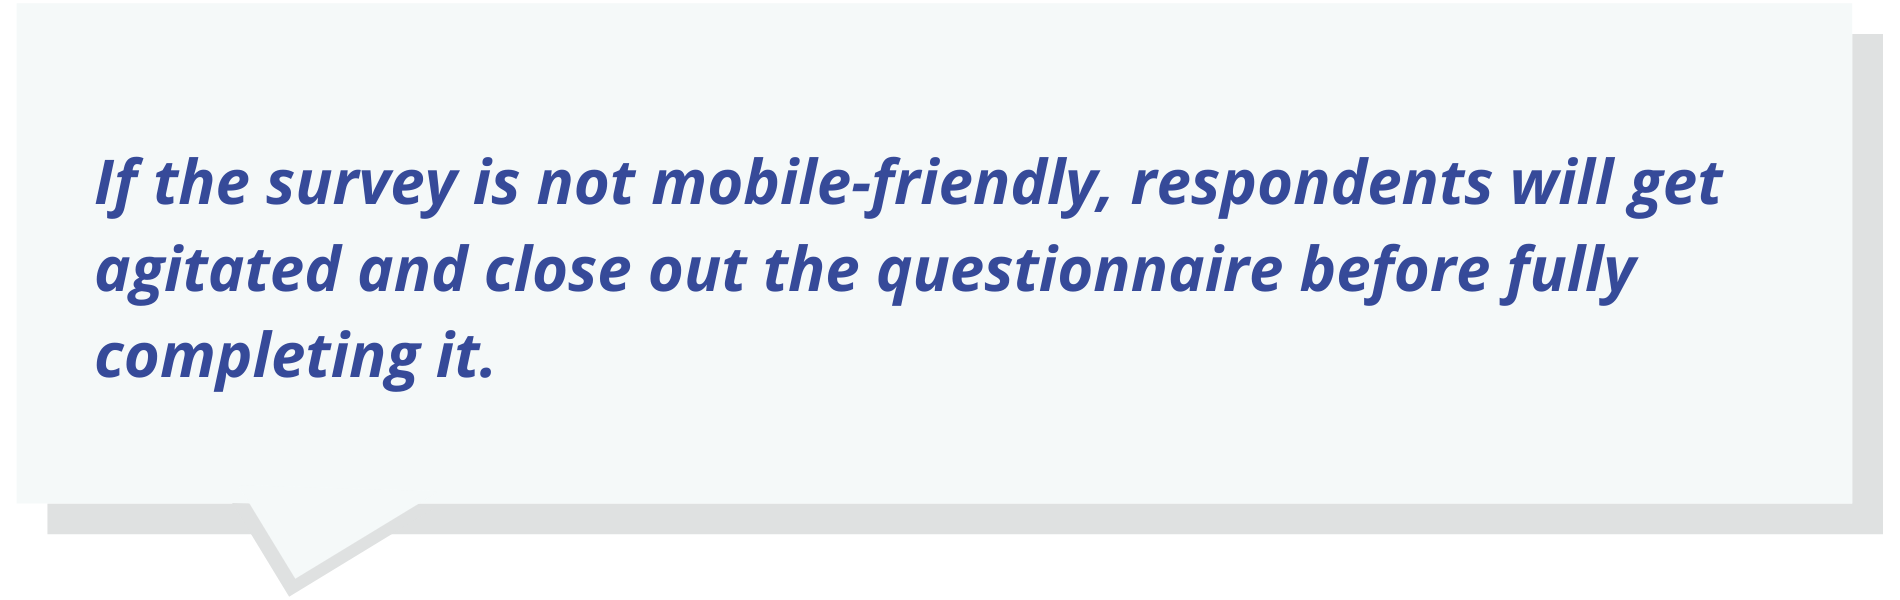 Quote Text: If the survey is not mobile-friendly, respondents will get agitated and close out the questionnaire before fully completing it.